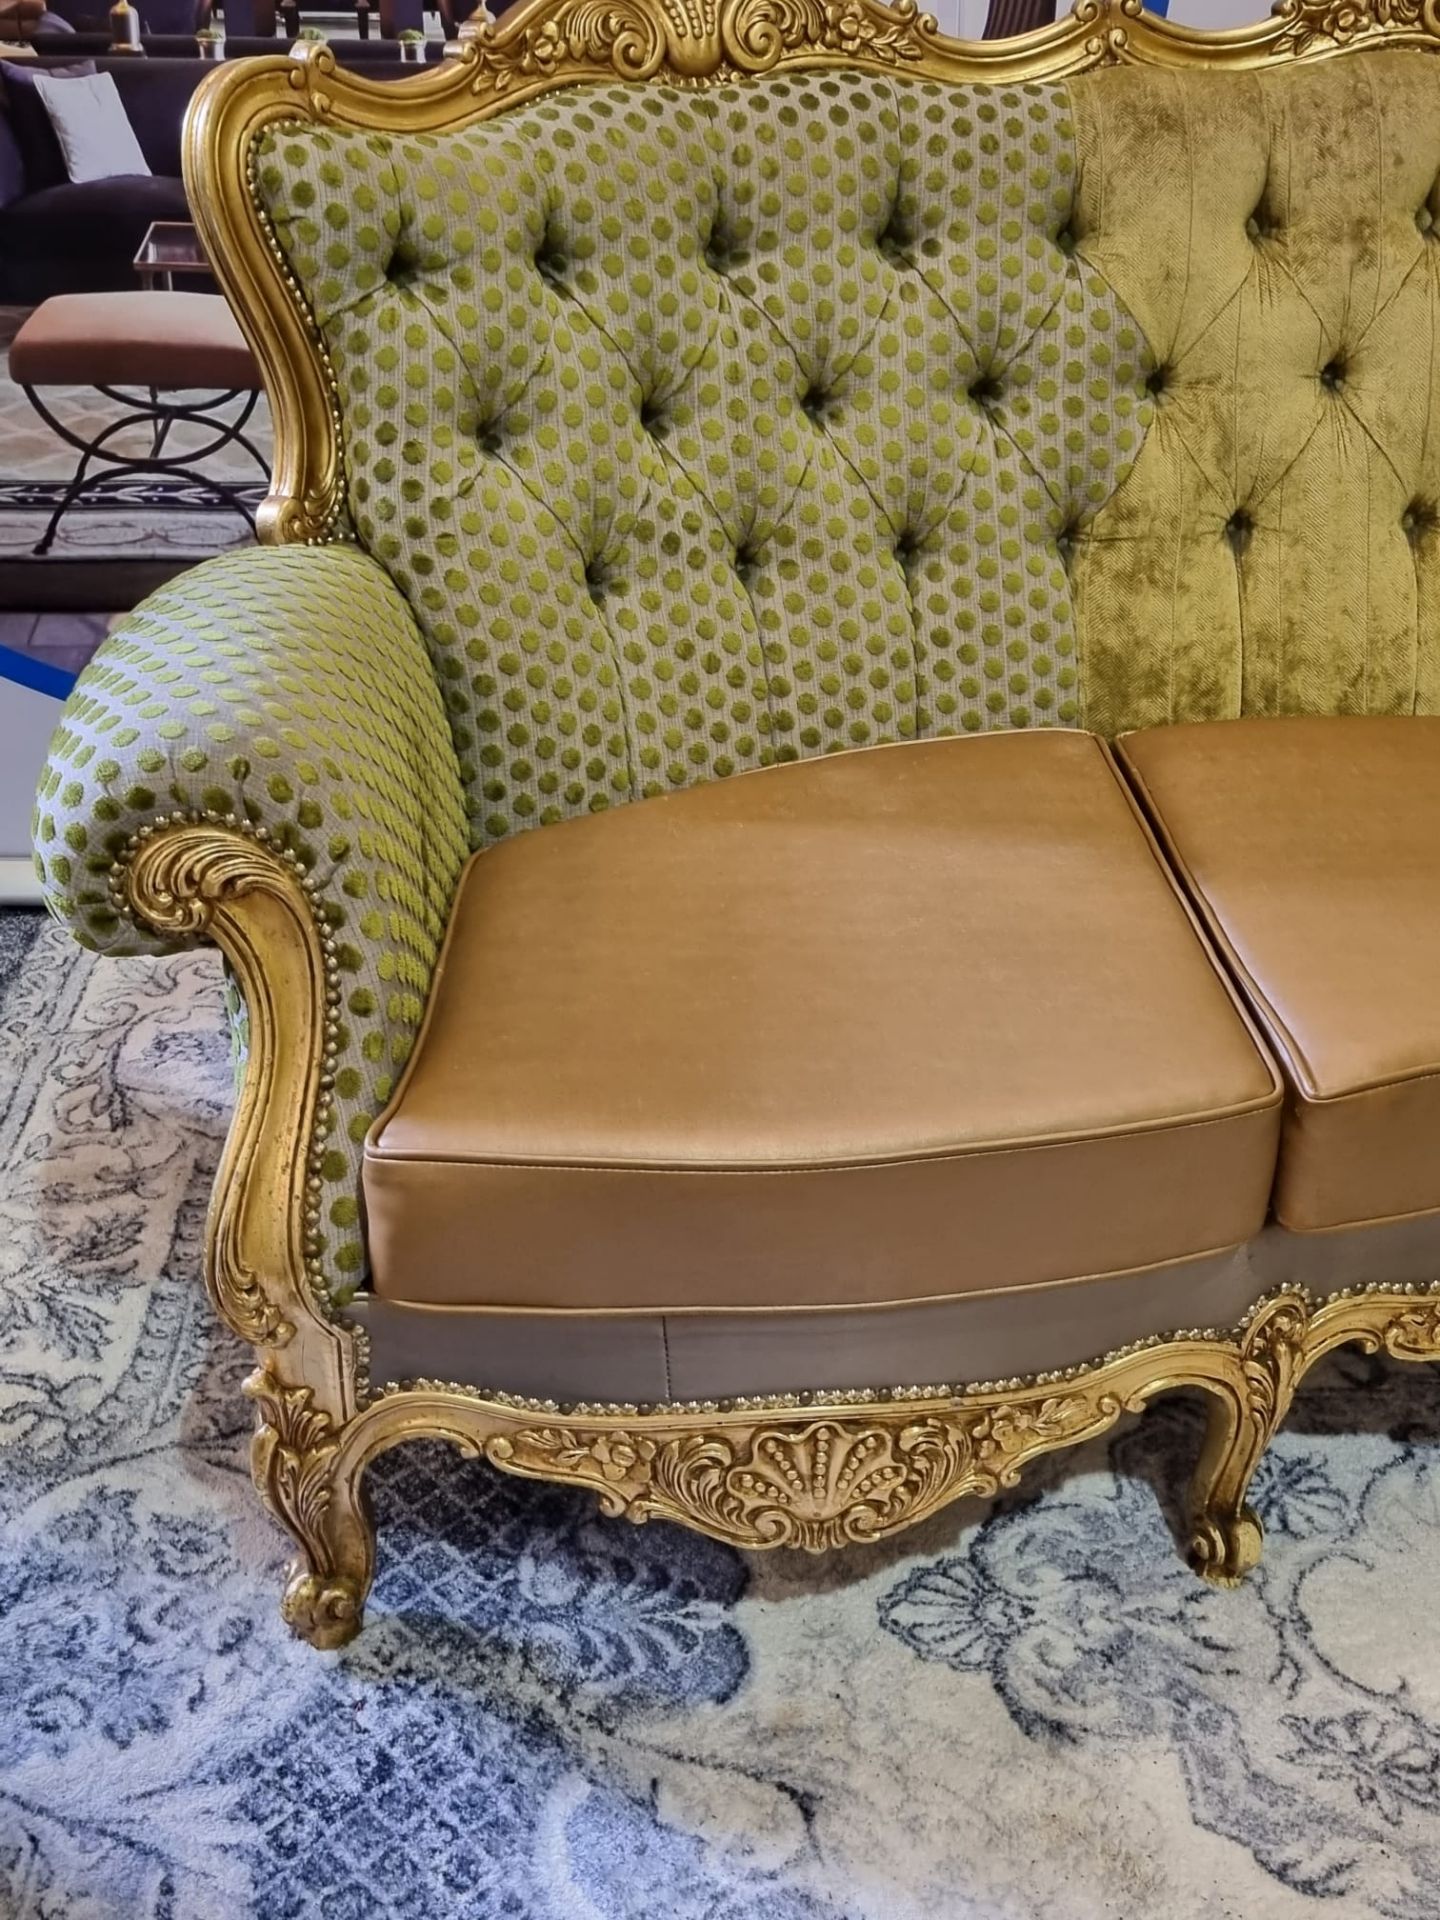 A Contemporary French Baroque Style Sofa The Gilded Ornate Frame Upholstered In Contrasting - Image 2 of 8